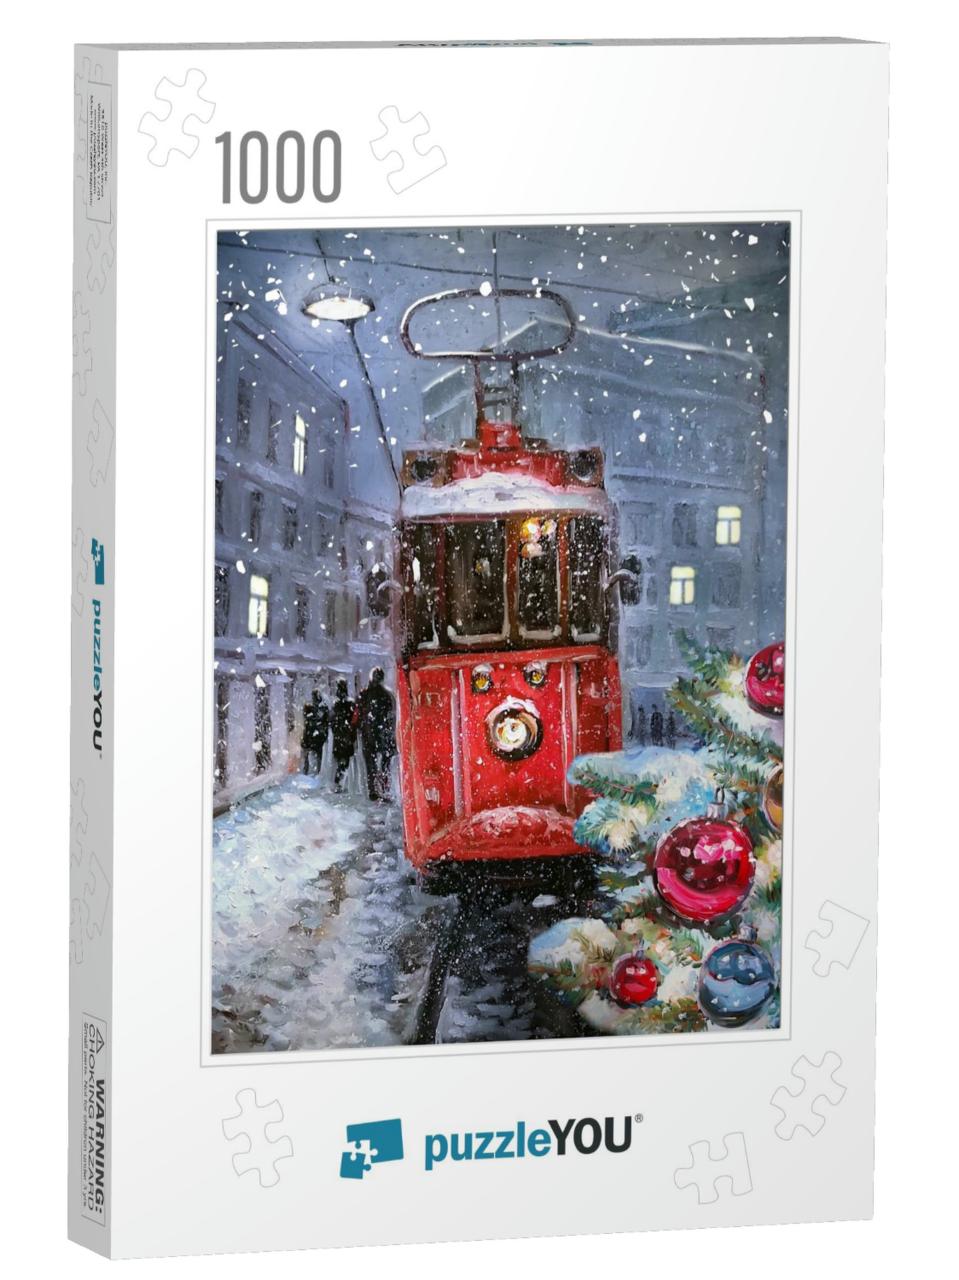 Oil Painting on Canvas - Winter Town Landscape with Decor... Jigsaw Puzzle with 1000 pieces